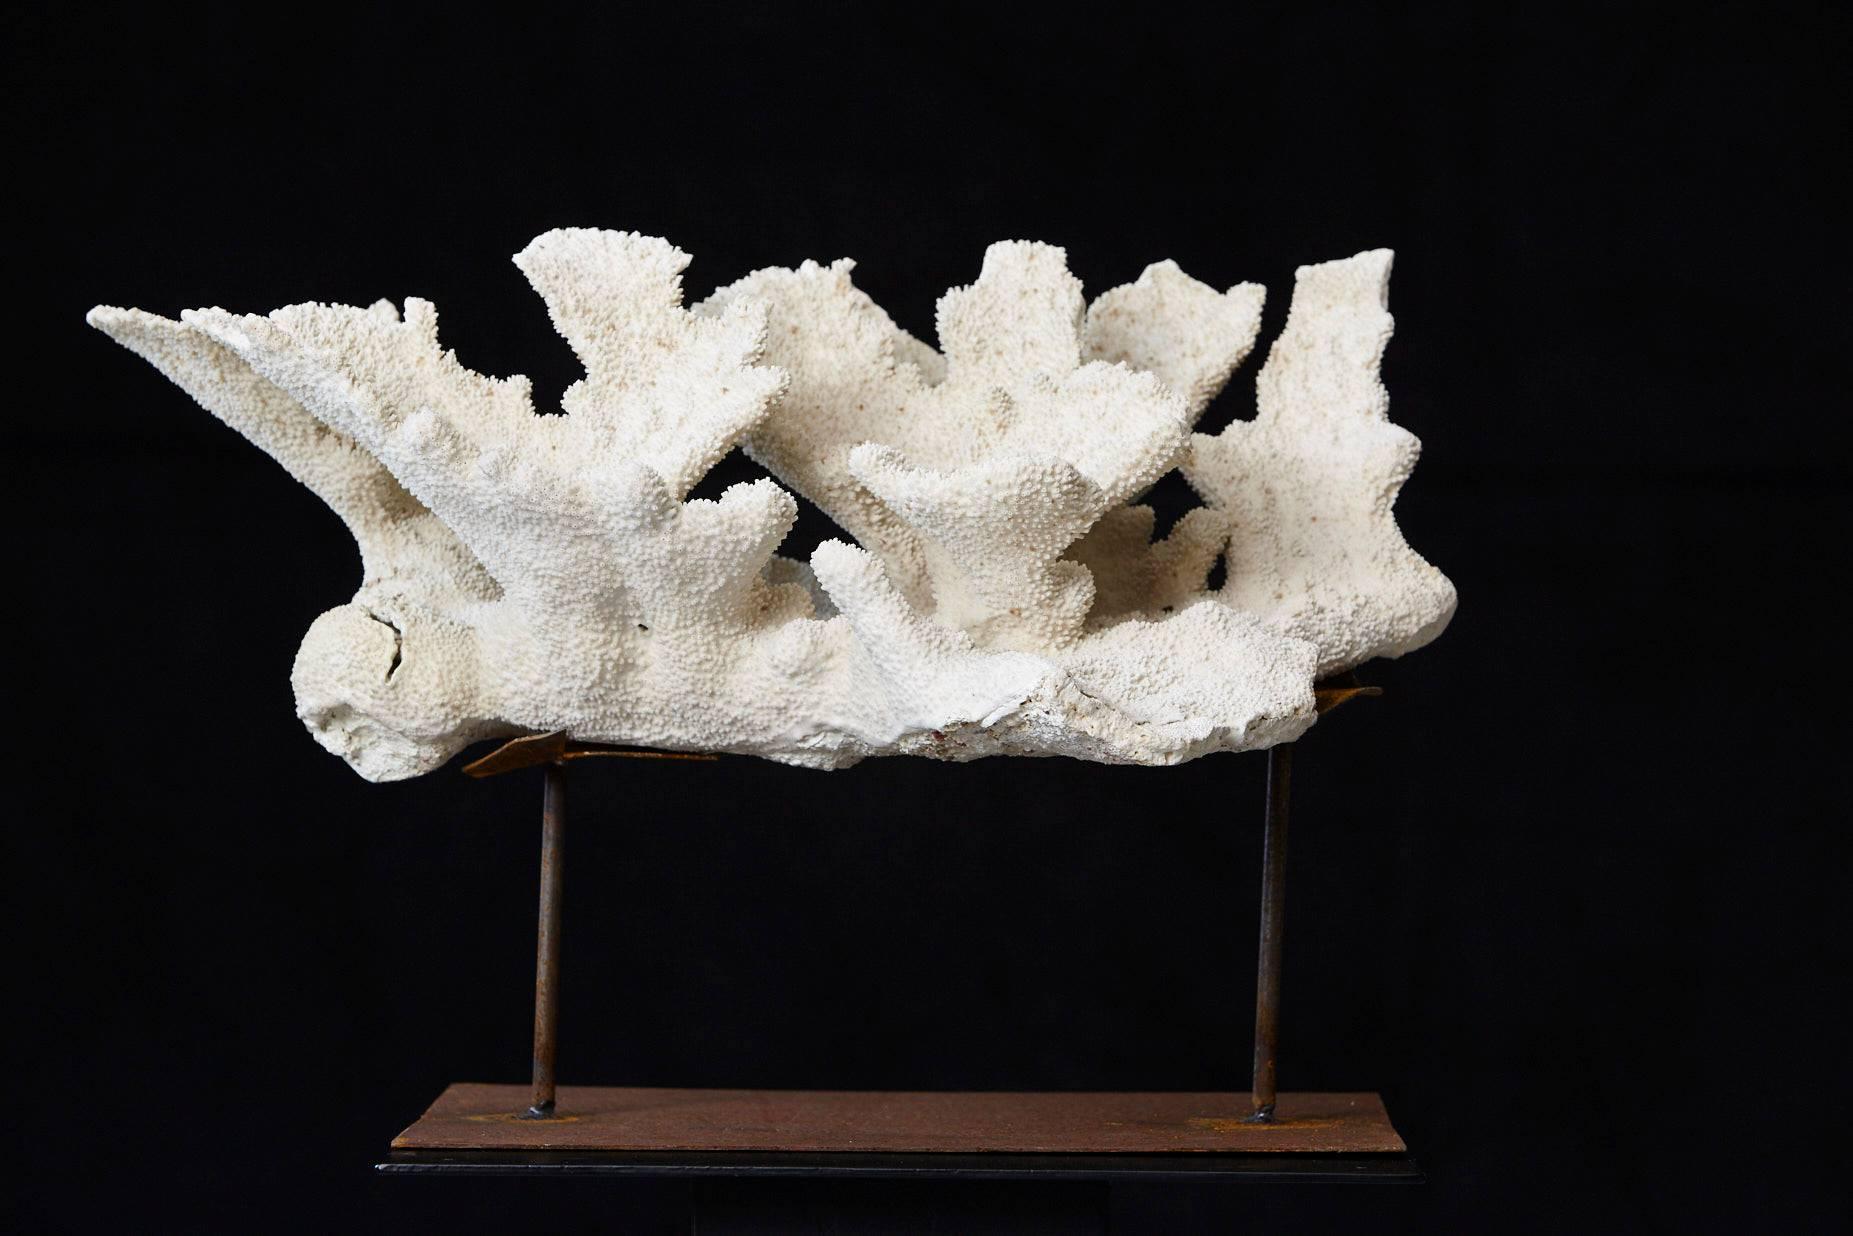 Pacific Islands Large Vintage White Coral Specimen on Custom Made Iron Stand II